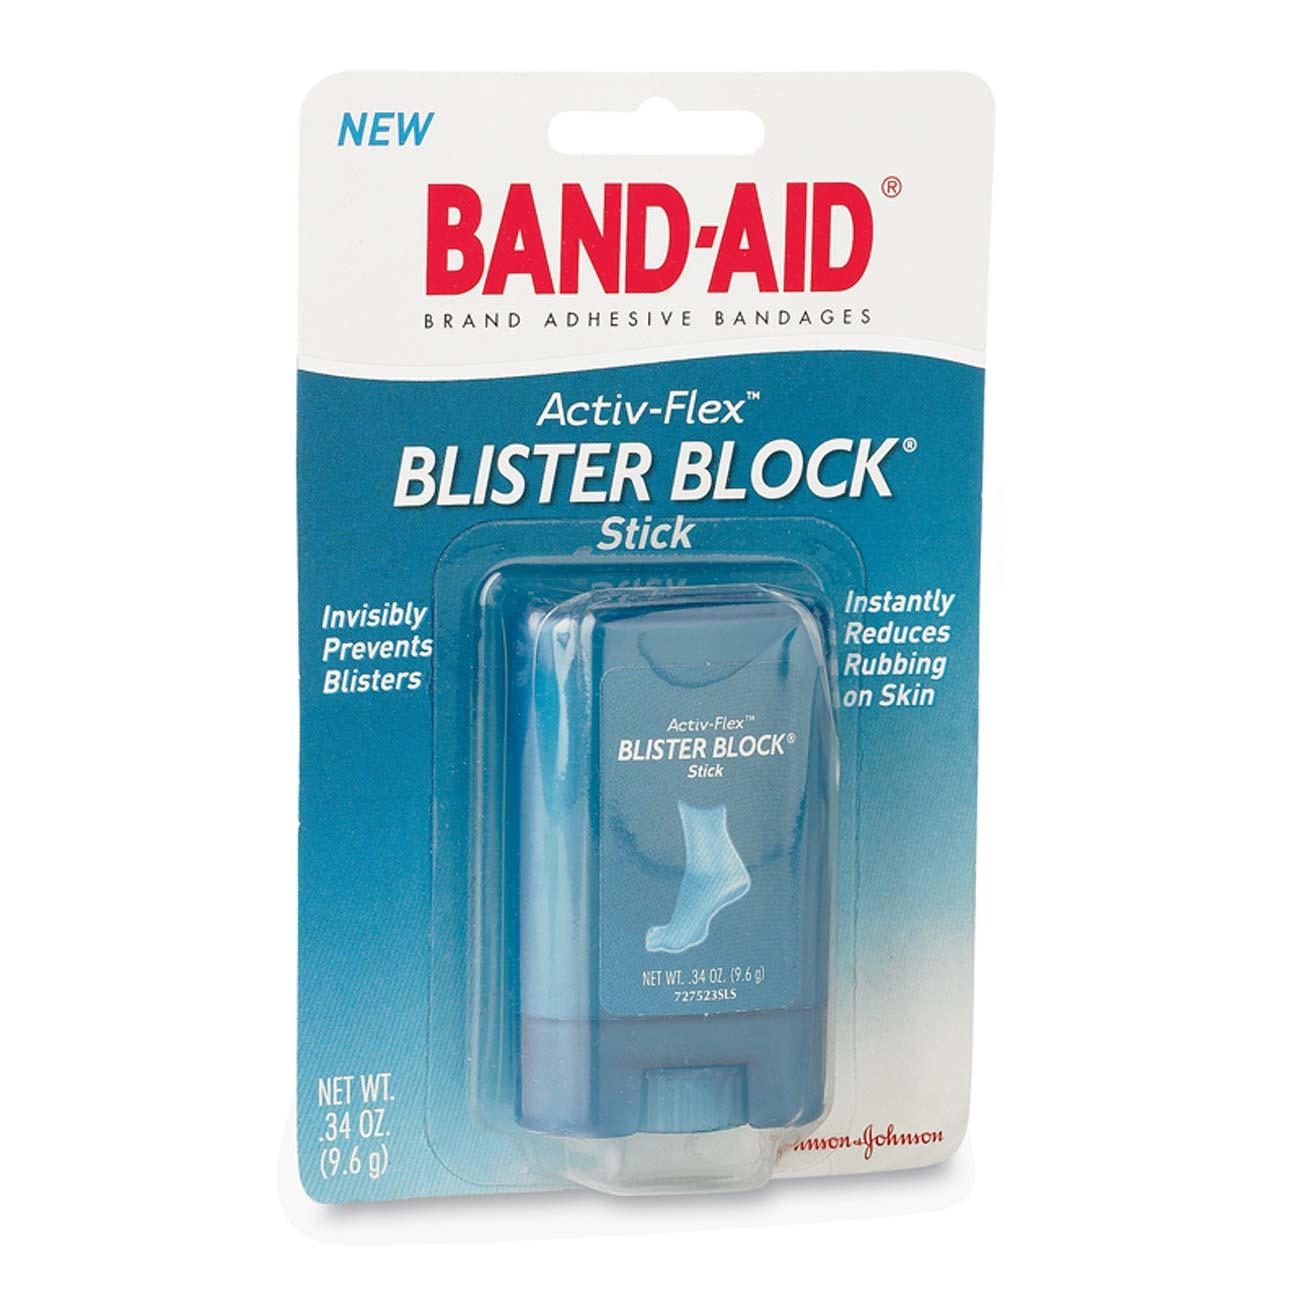 Band-Aid Blister Block Stick - image 2 of 2